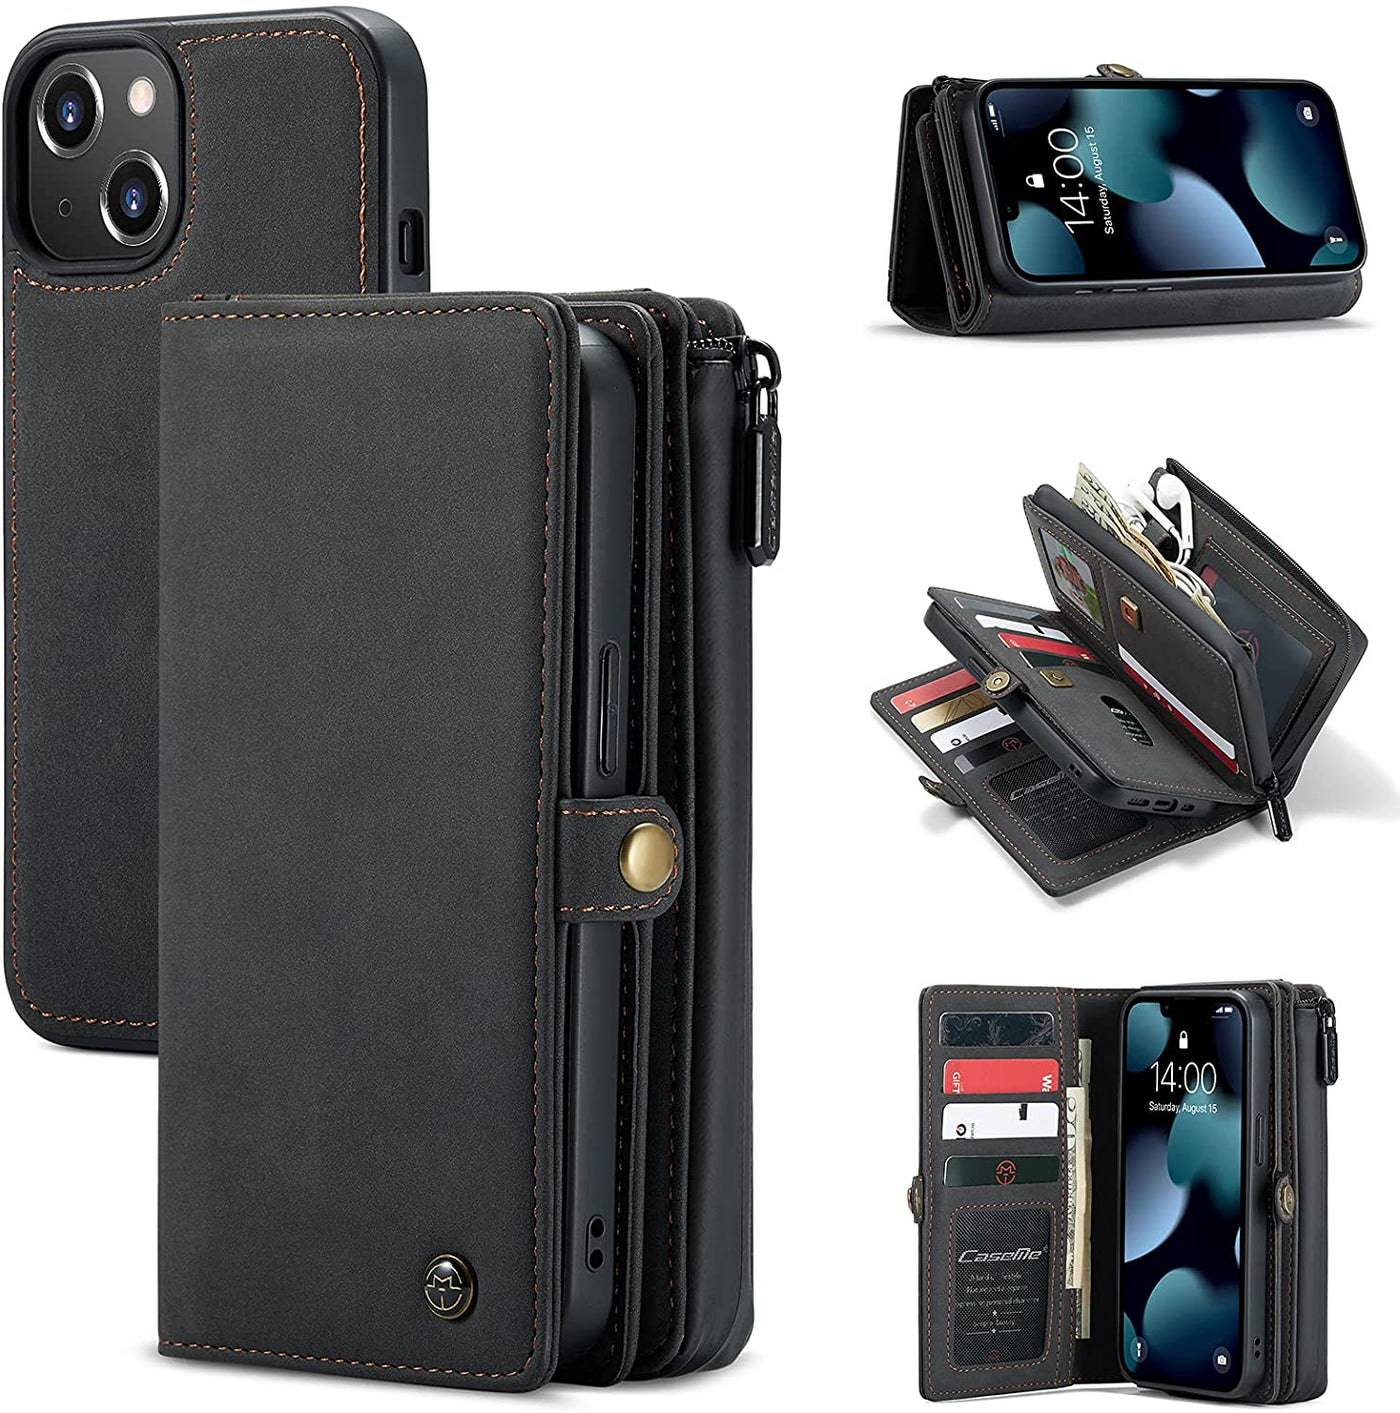 iPhone 13 mini 360 degree protection leather wallet flip cover by excelsior